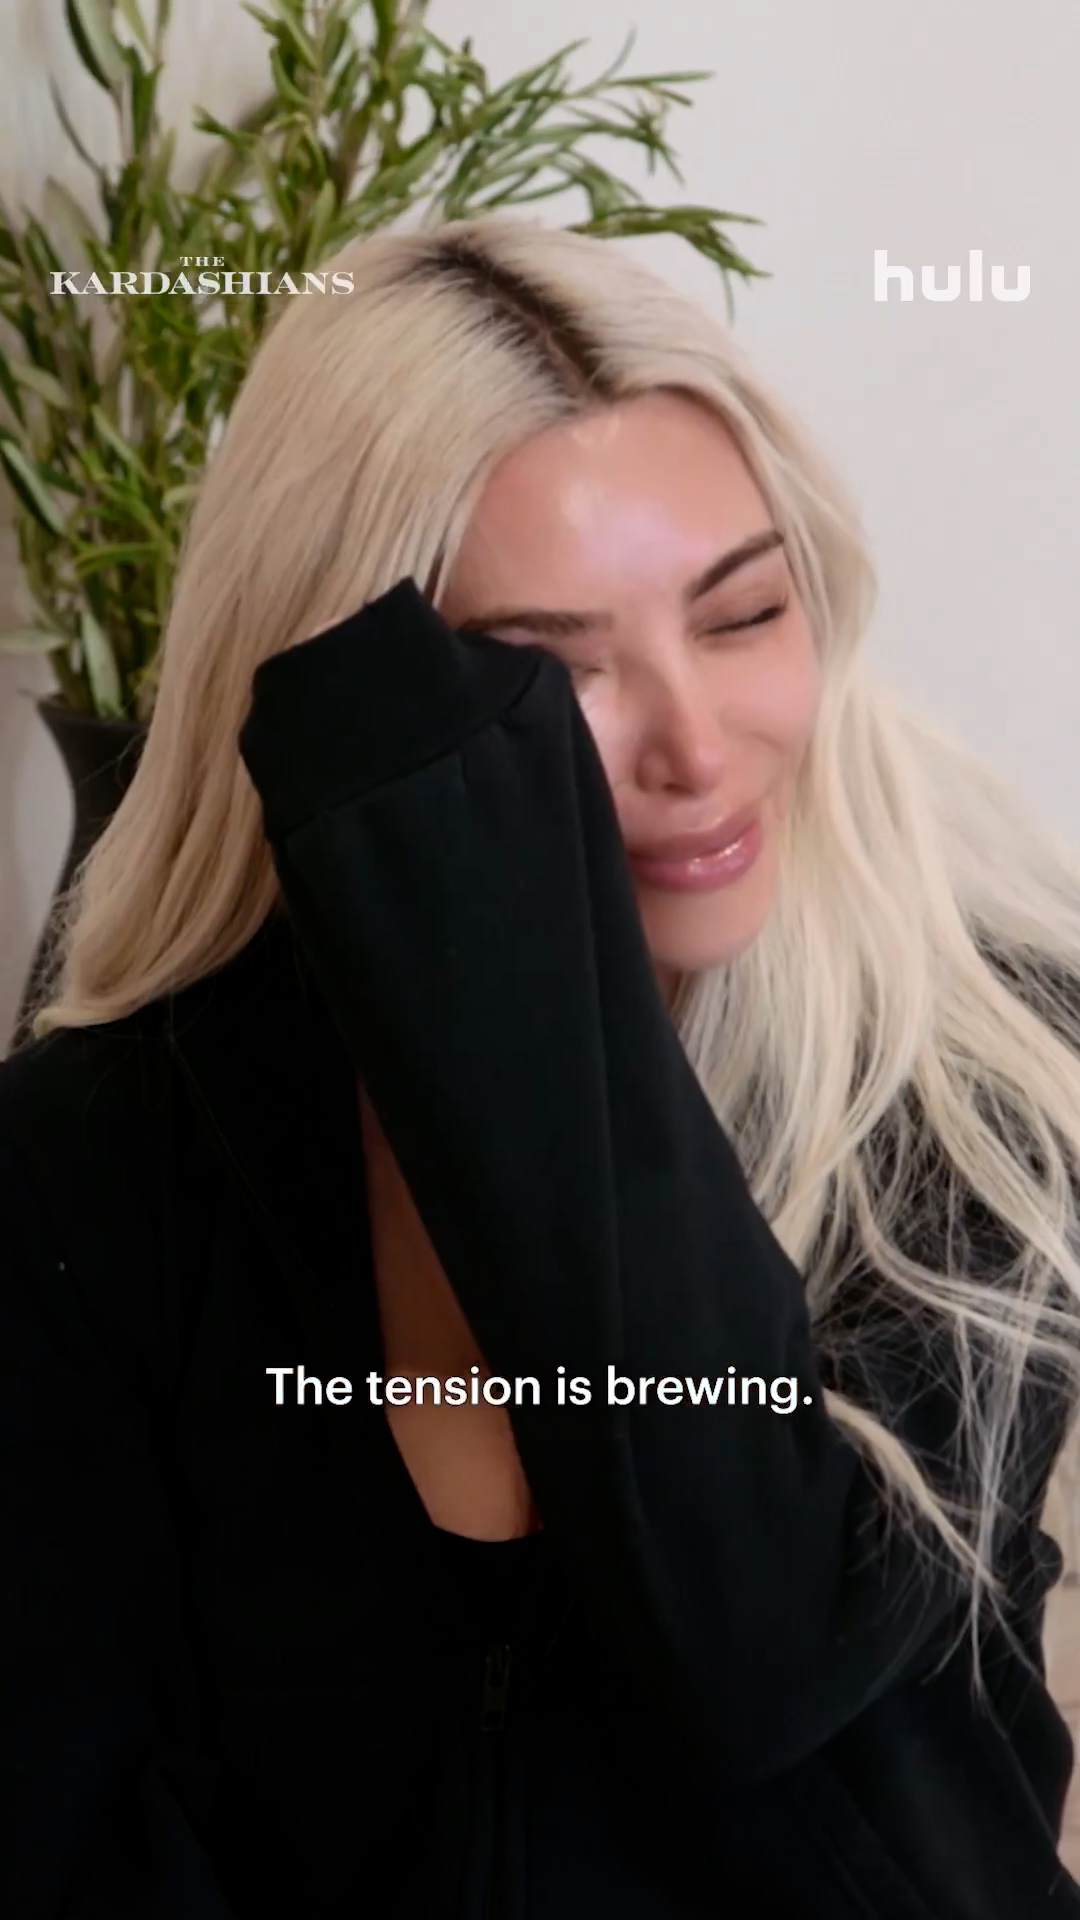 Kim Kardashian finally addresses feud with sister Kourtney as she opens up about ’emotional and frustrating’ season